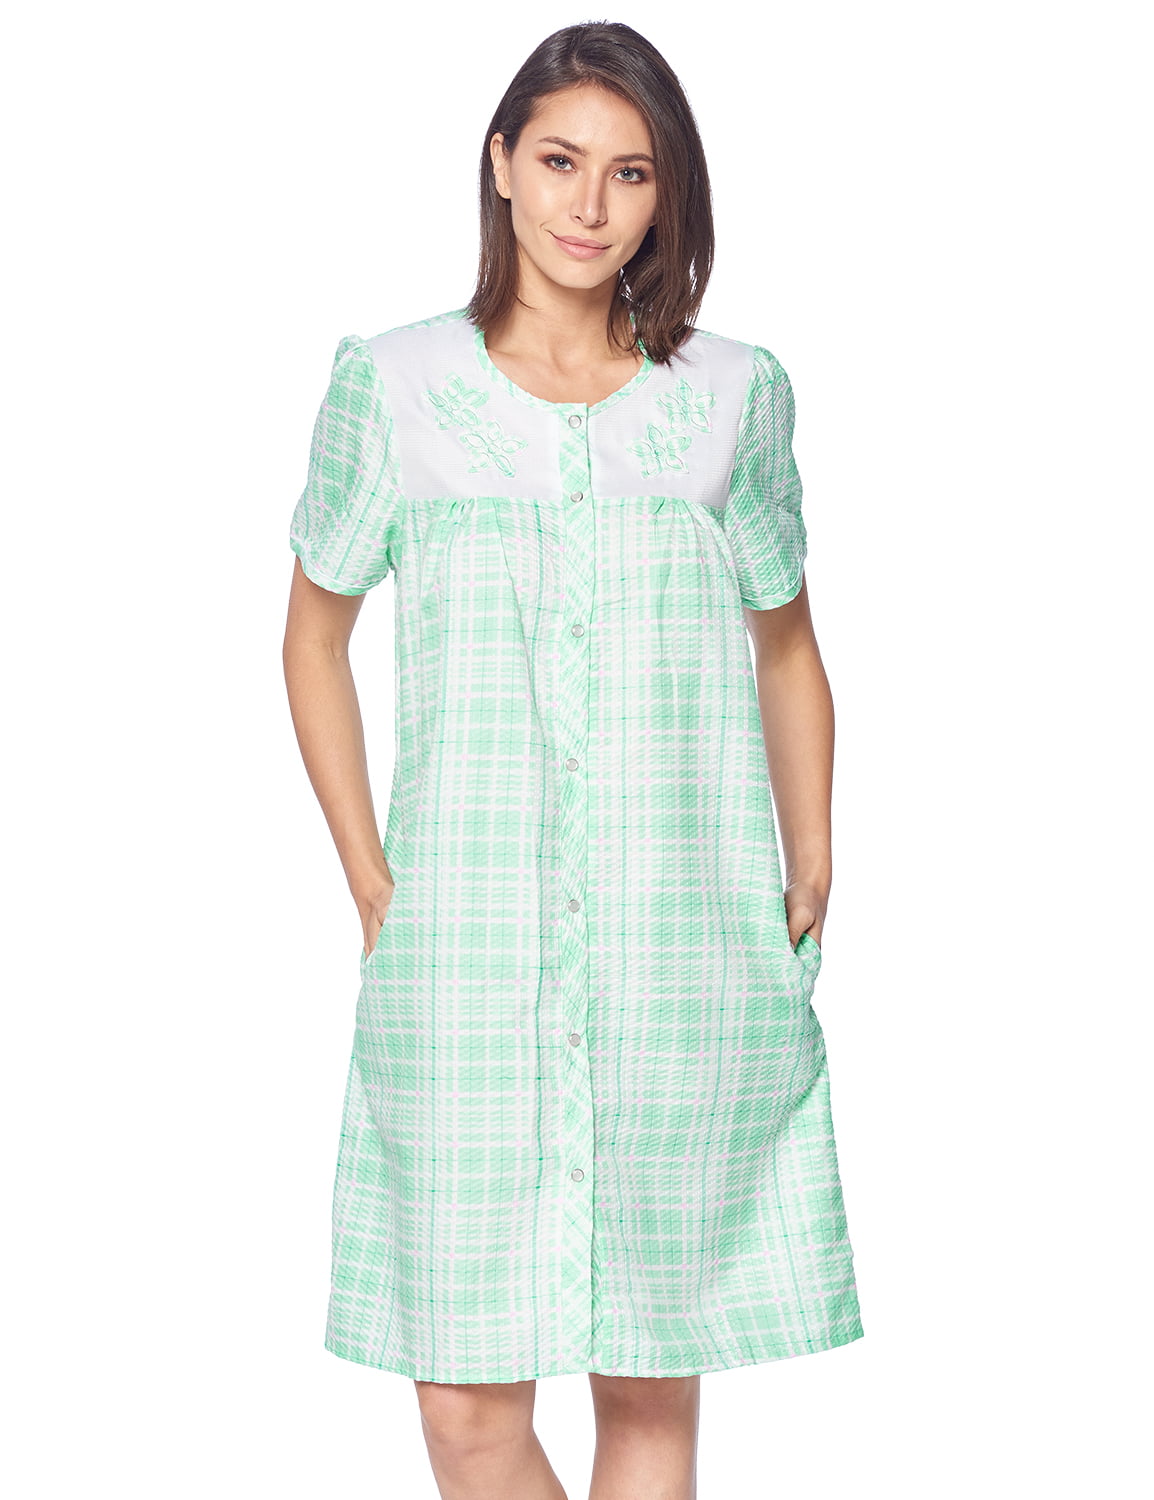 Buy > house dress for ladies > in stock